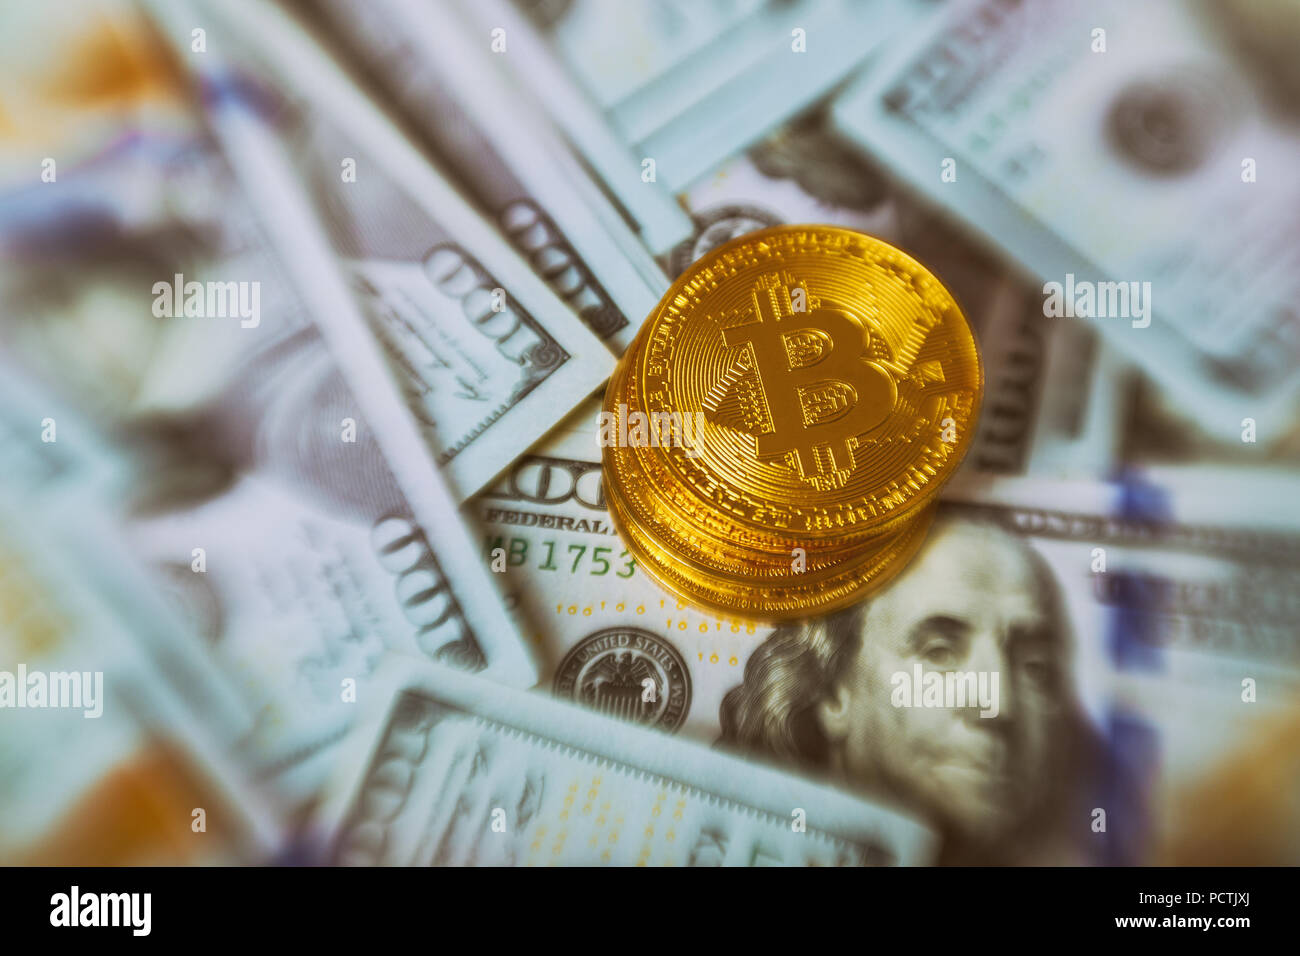 Golden Bitcoins on US dollars for background digital currency close-up. New Virtual money concept. cryptocurrency and worldwide payment system Stock Photo